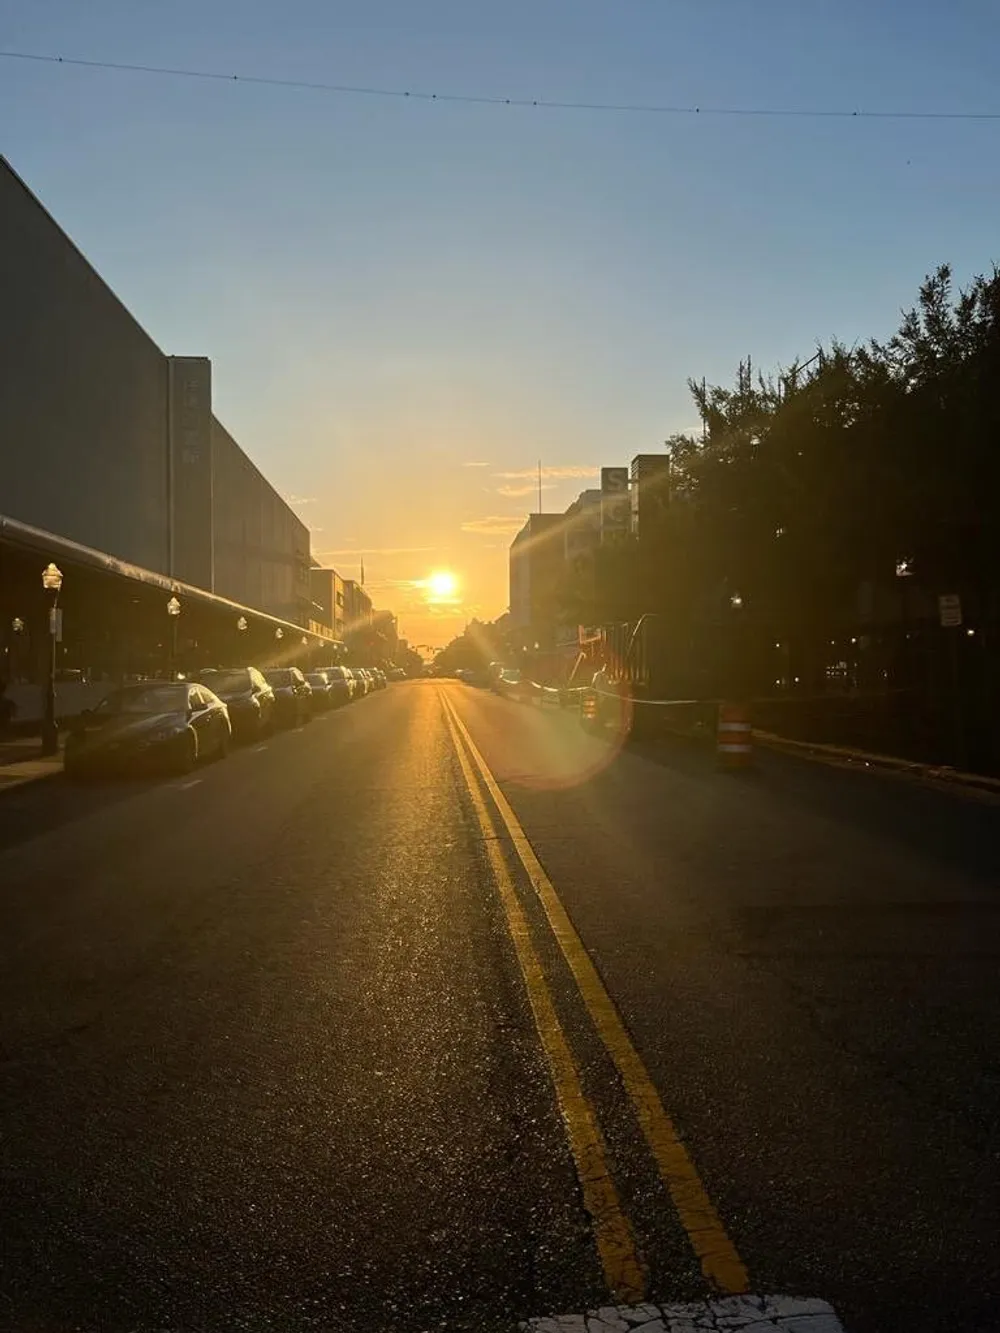 The image shows a serene sunset view down an urban street lined with parked cars and buildings with the sun casting a golden glow and long shadows on the pavement